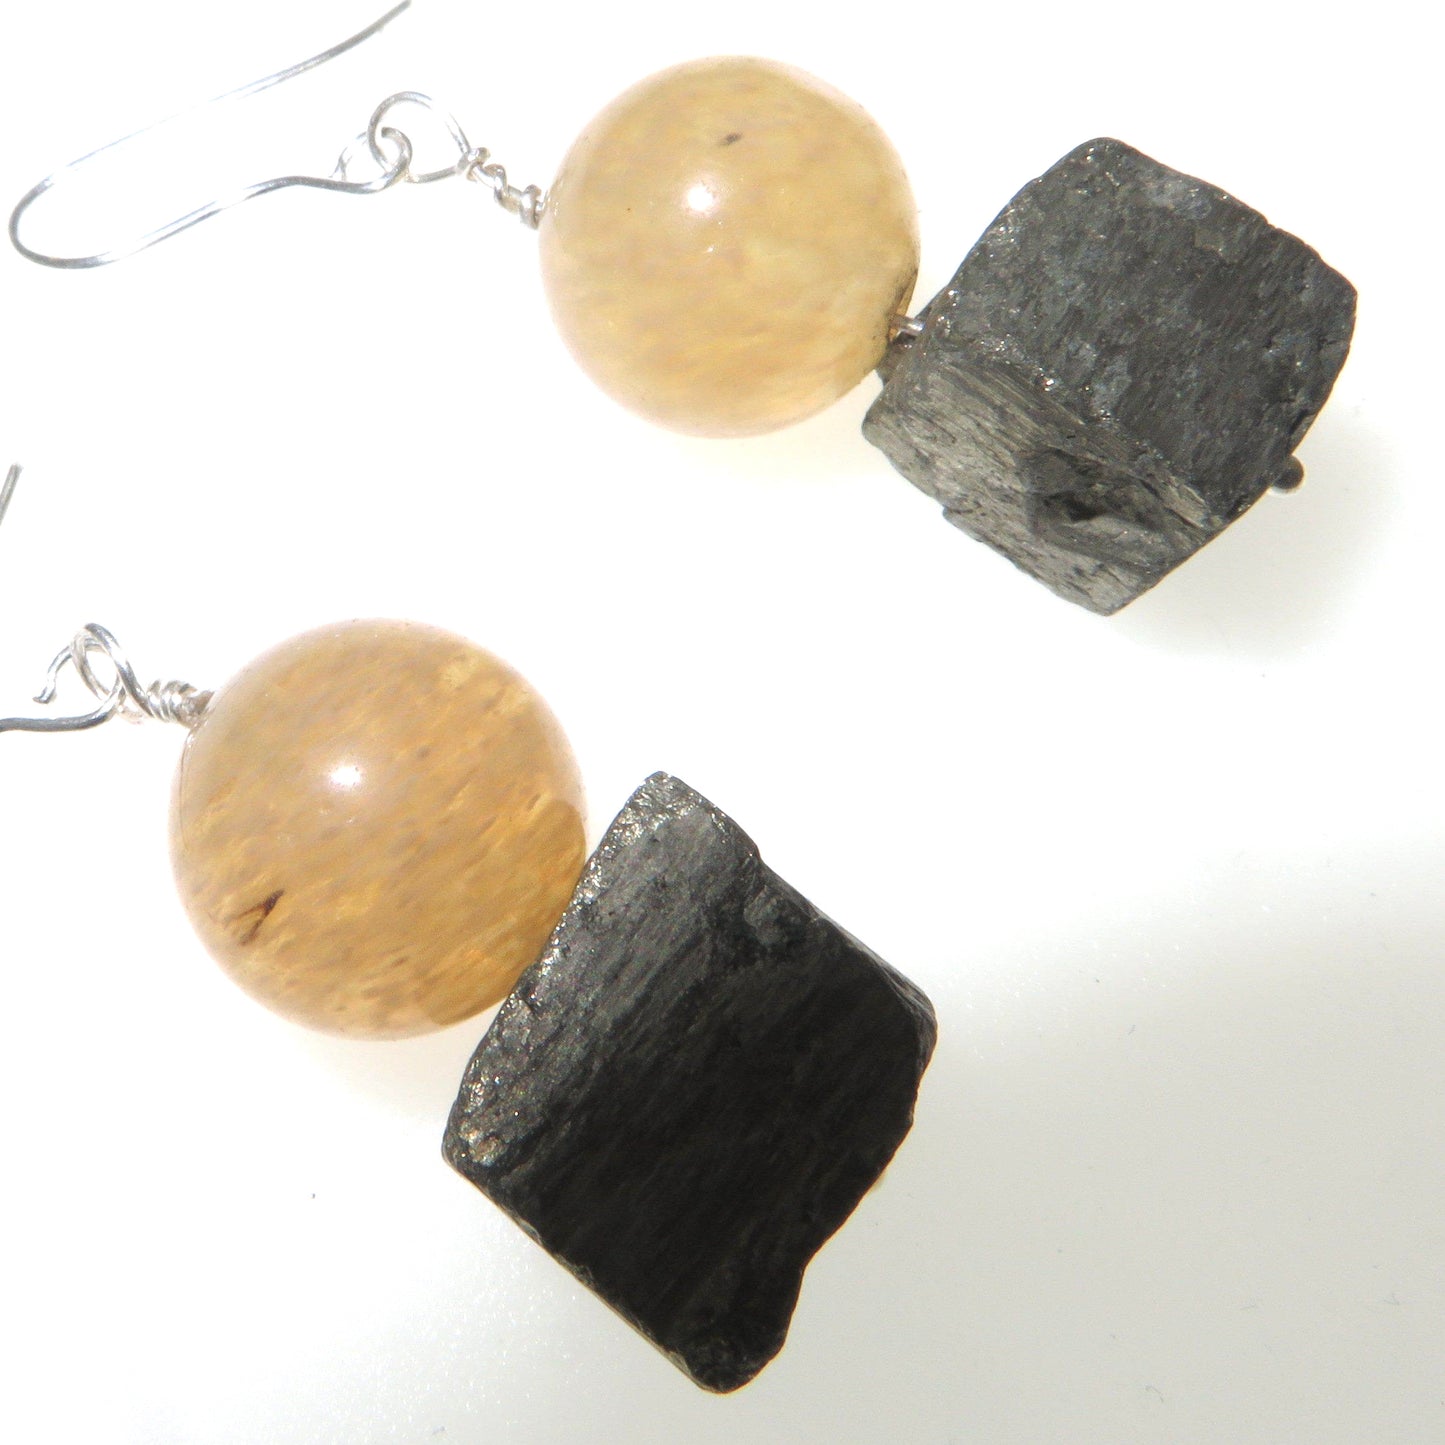 Sharing Natural Crystal Earrings - Citrine & Pyrite 8mm beads & Pyrite 8mm cubes